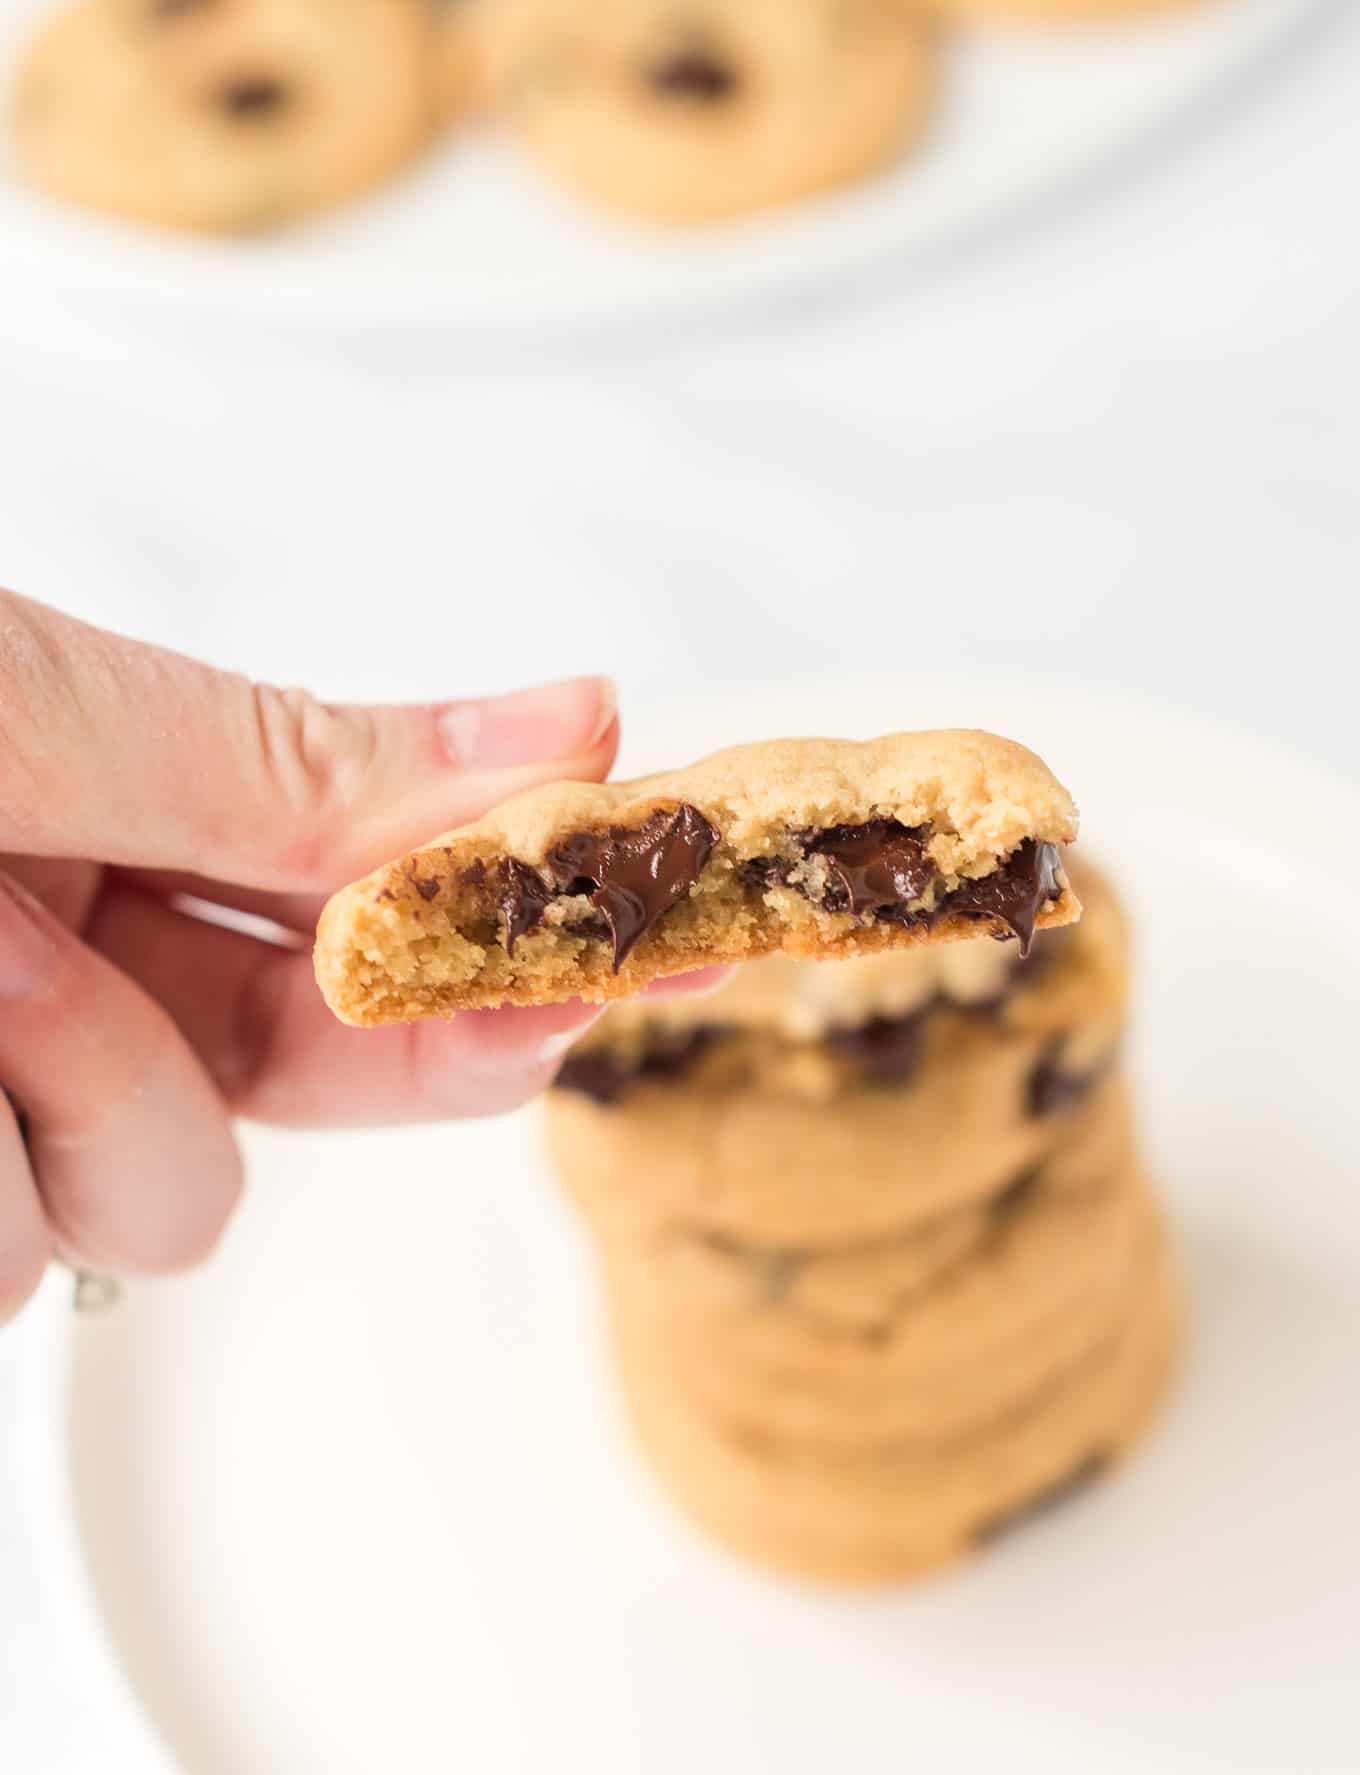 a hand holding a chocolate chip cookie with a bite taken out